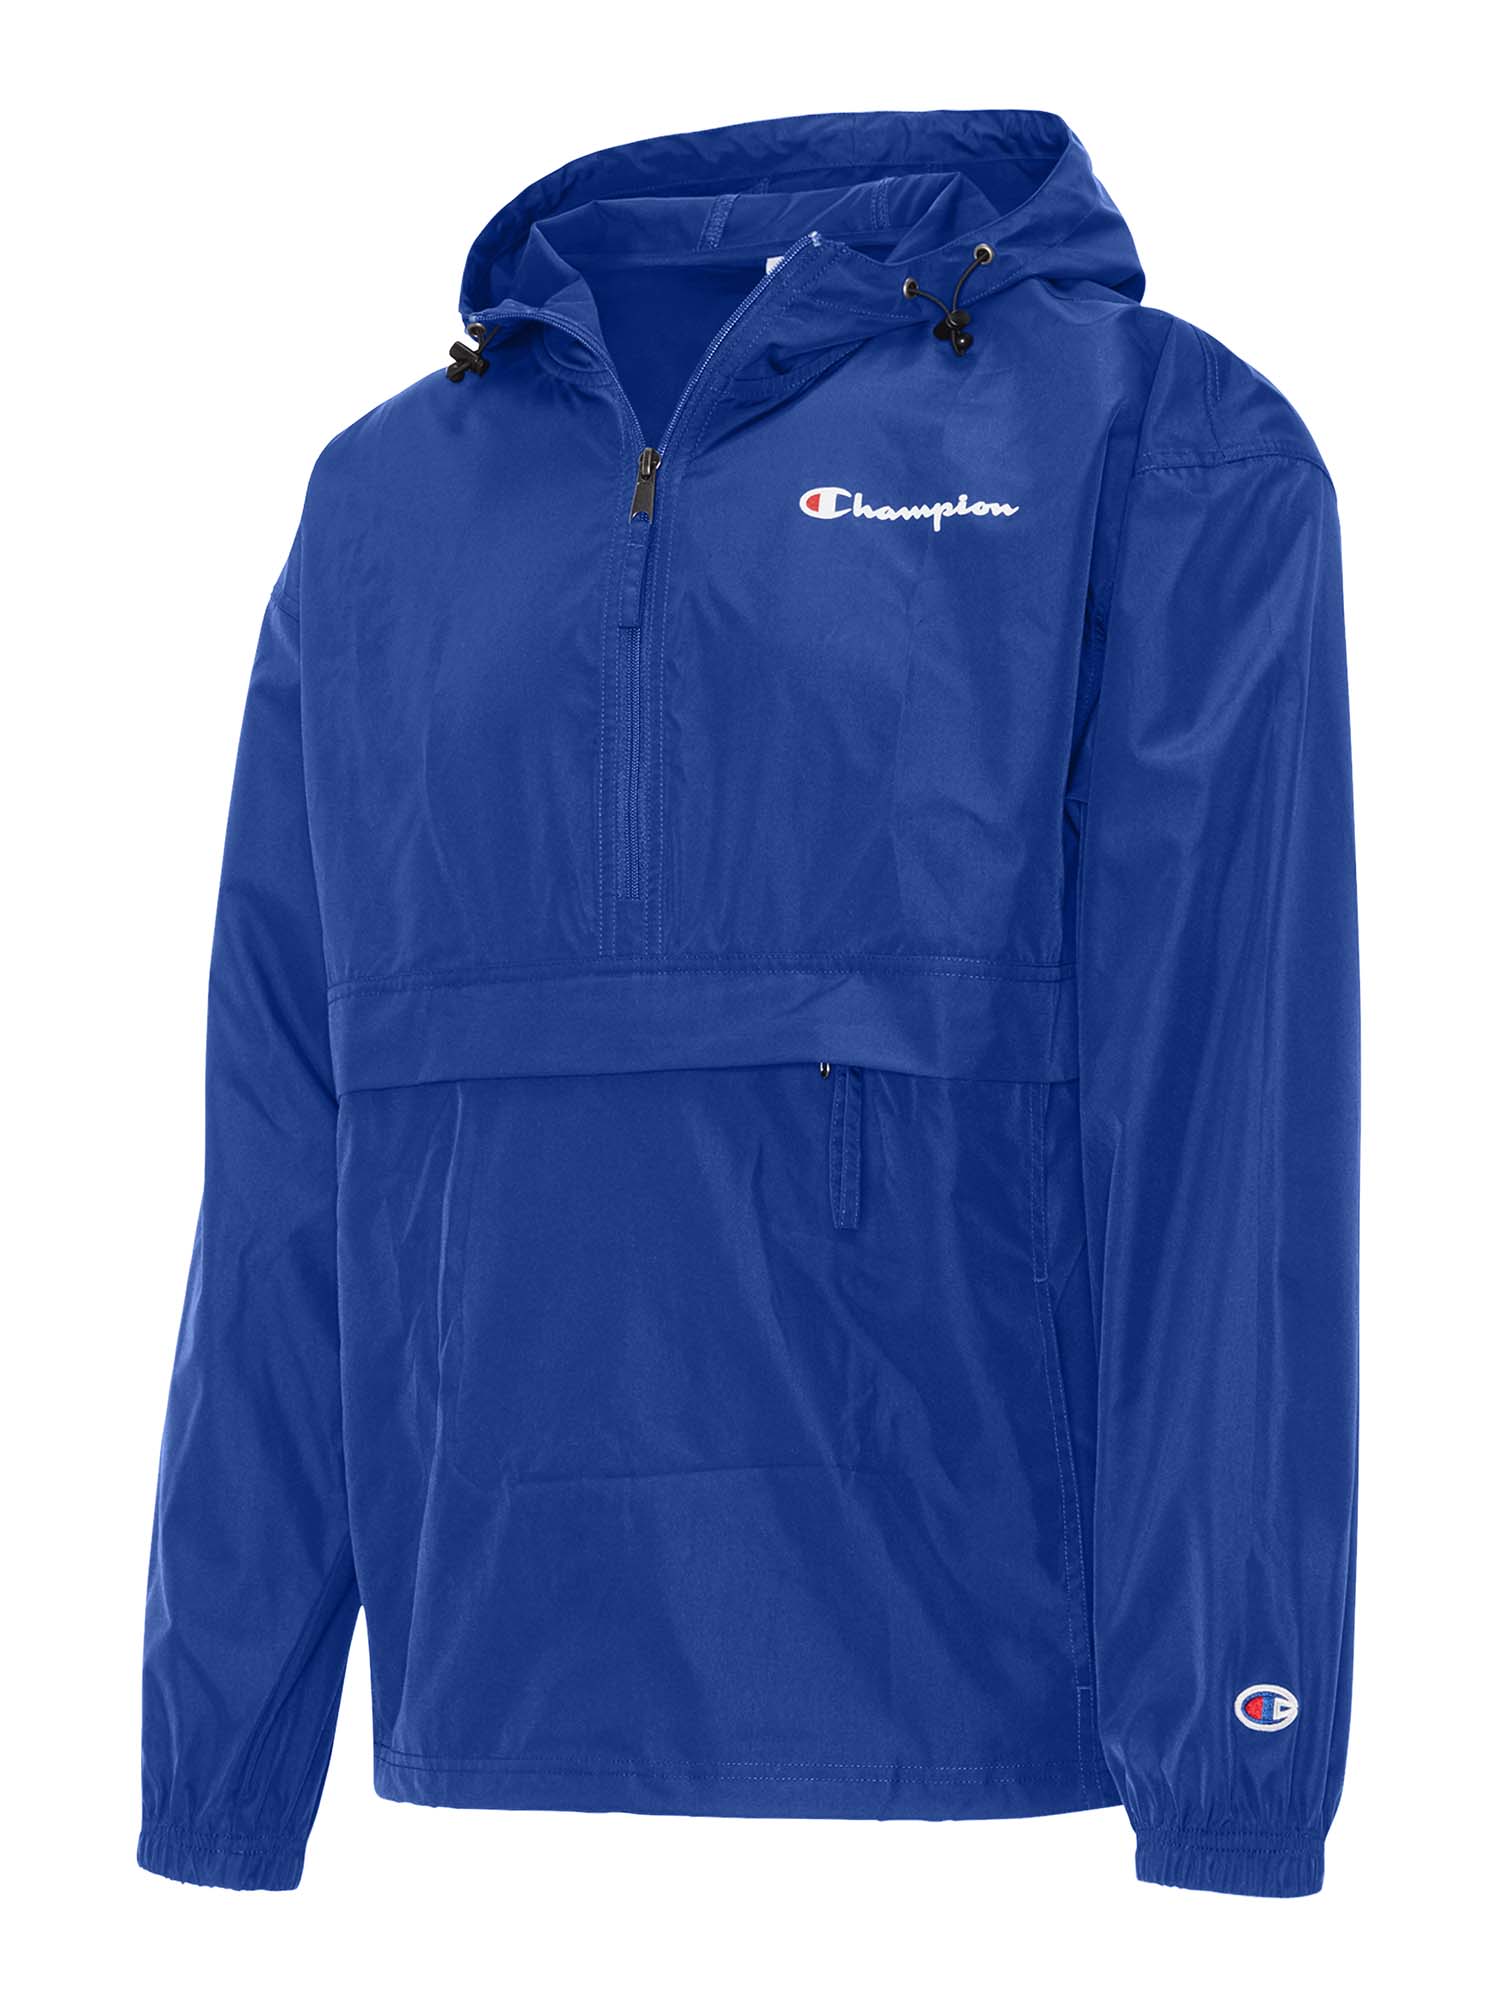 Champion Men's and Big Men's Stadium Packable Windbreaker Jacket, up to Size 2XL - image 2 of 7